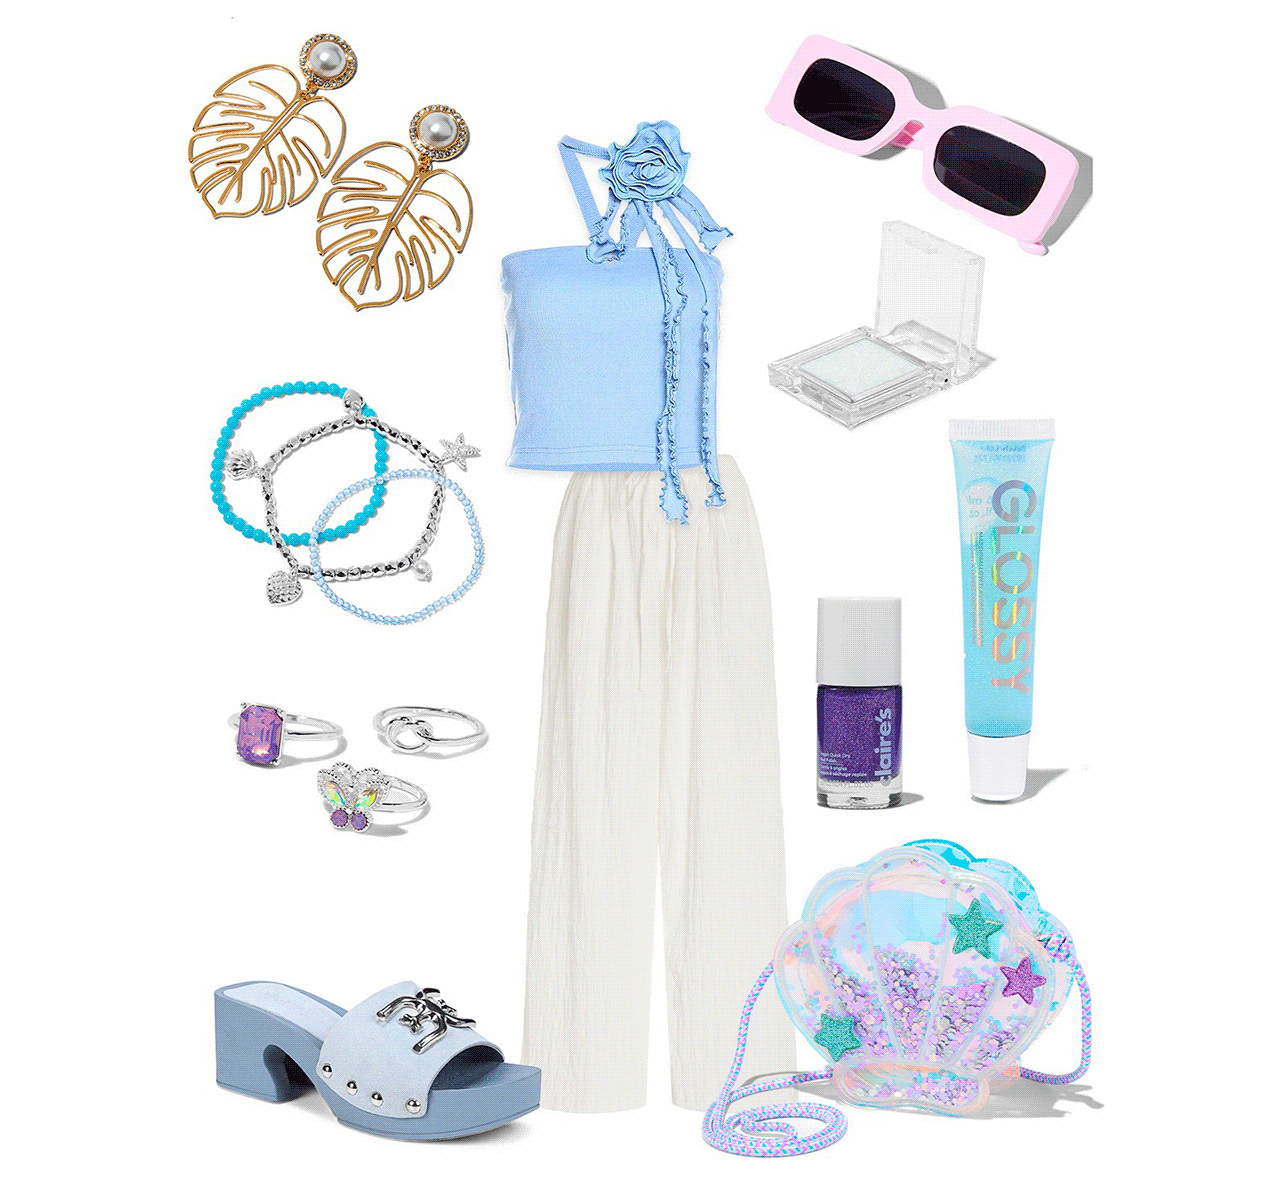 Ready, Set, Summer! Shop all the accessories you need for summer OOTDs